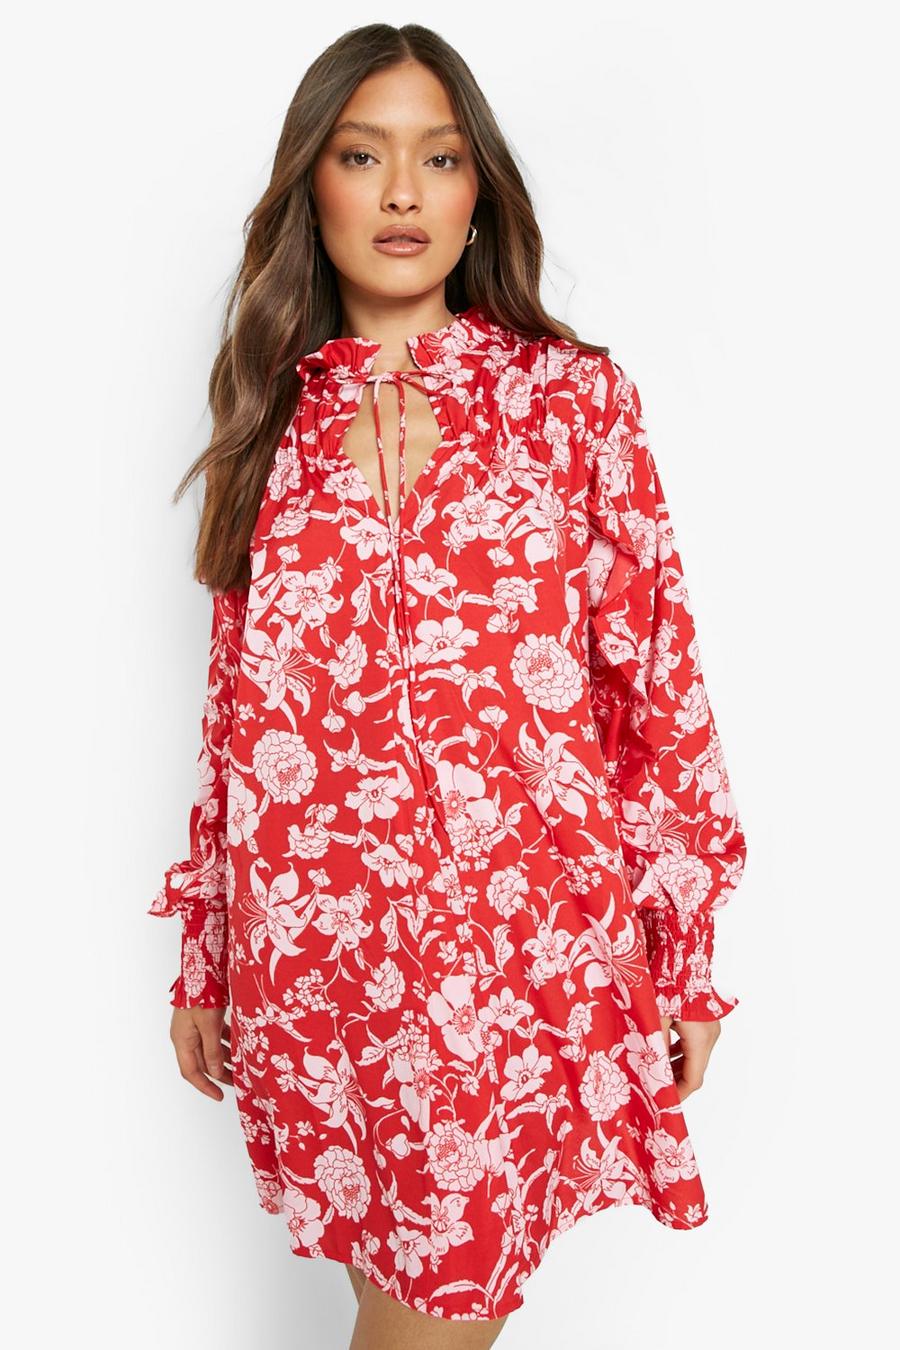 Red Floral High Neck Ruffle Shift Dress